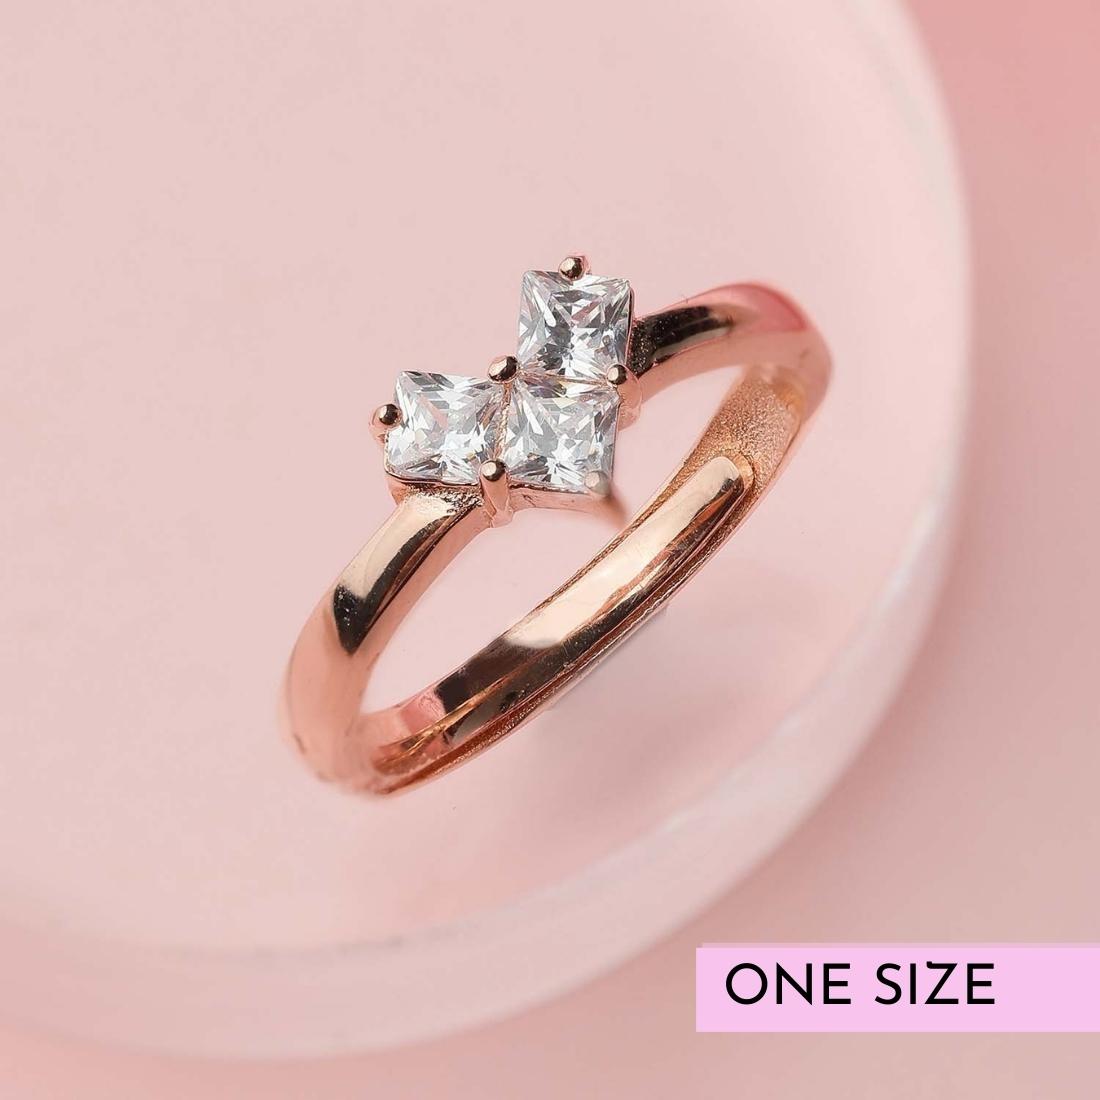 Heartcore 925 Silver Ring in Rose Gold (Adjustable)